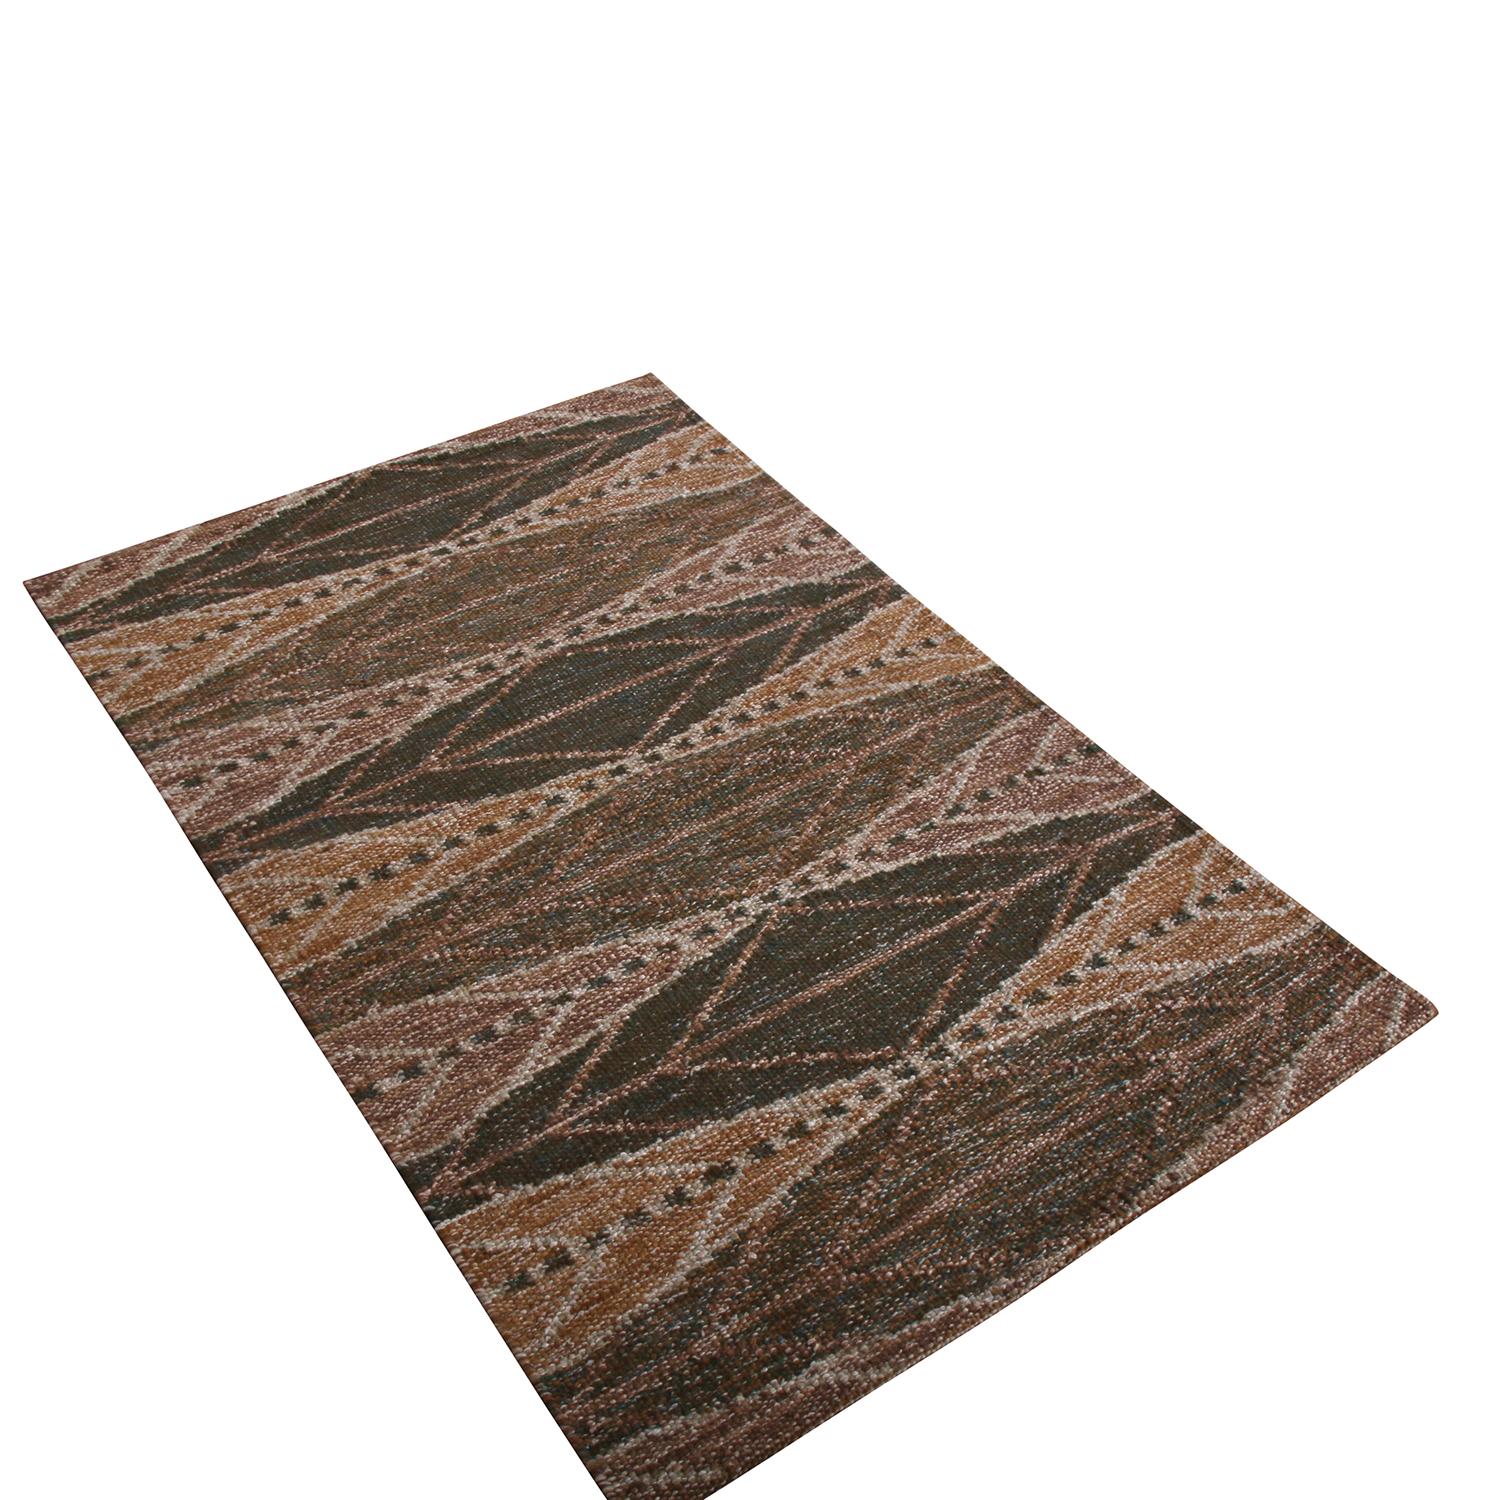 Rug & Kilim presents a custom piece from its Kilim & Flatweave selections. Handwoven in wool, this piece enjoys a defined geometric pattern in chocolate brown, green, gold, and beige-gray tones with tasteful abrash variations in beige for an